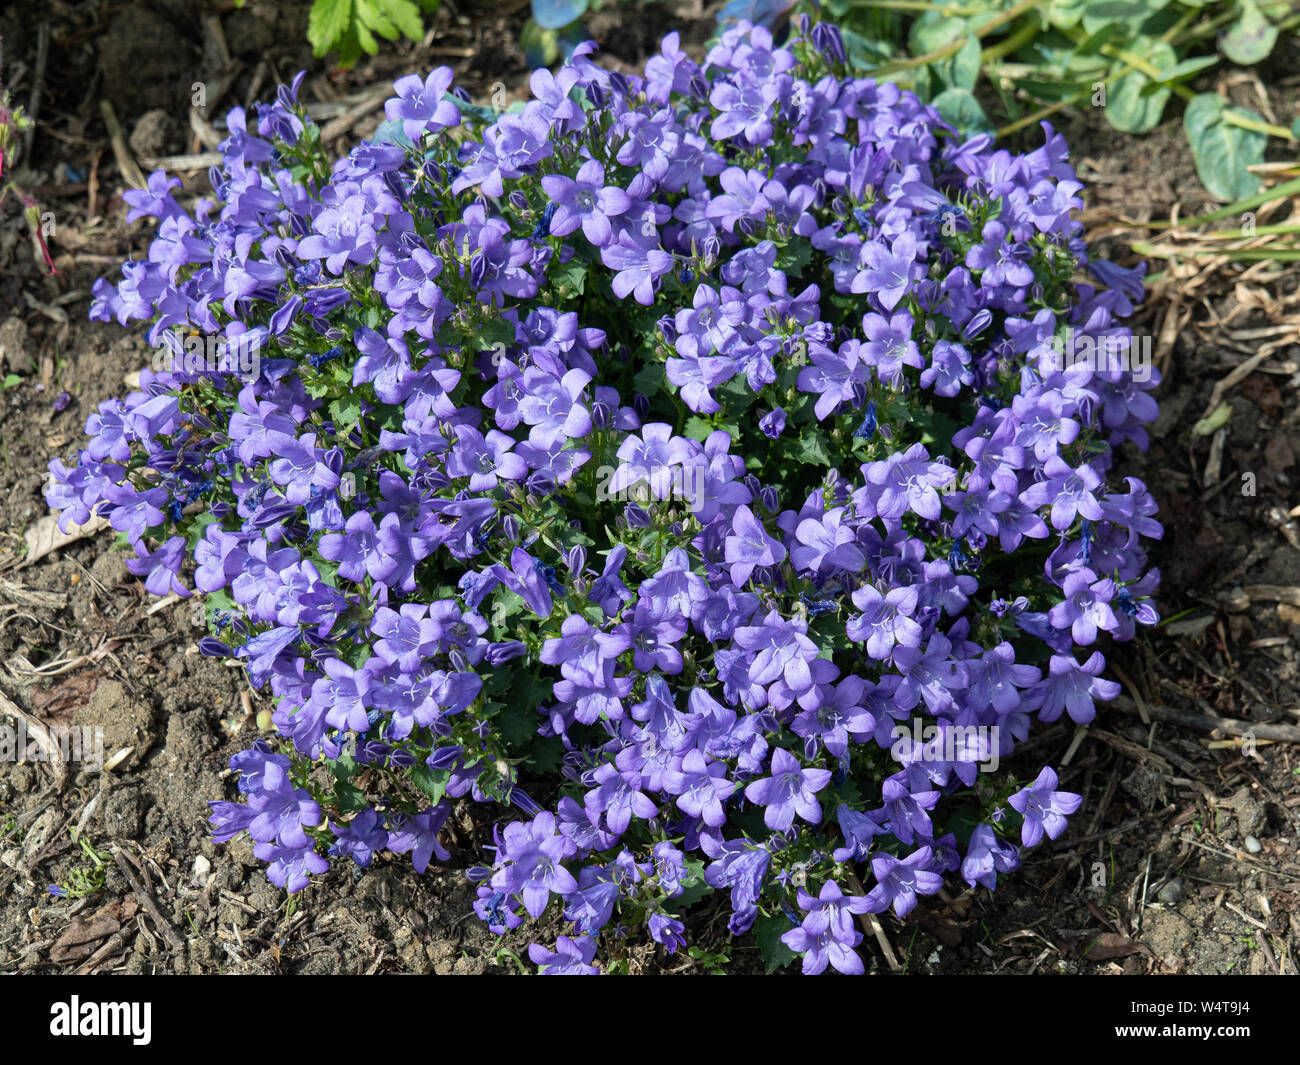 A clump of Campanula Sago in full flower showing the light blue bell shaped flowers Stock Photo